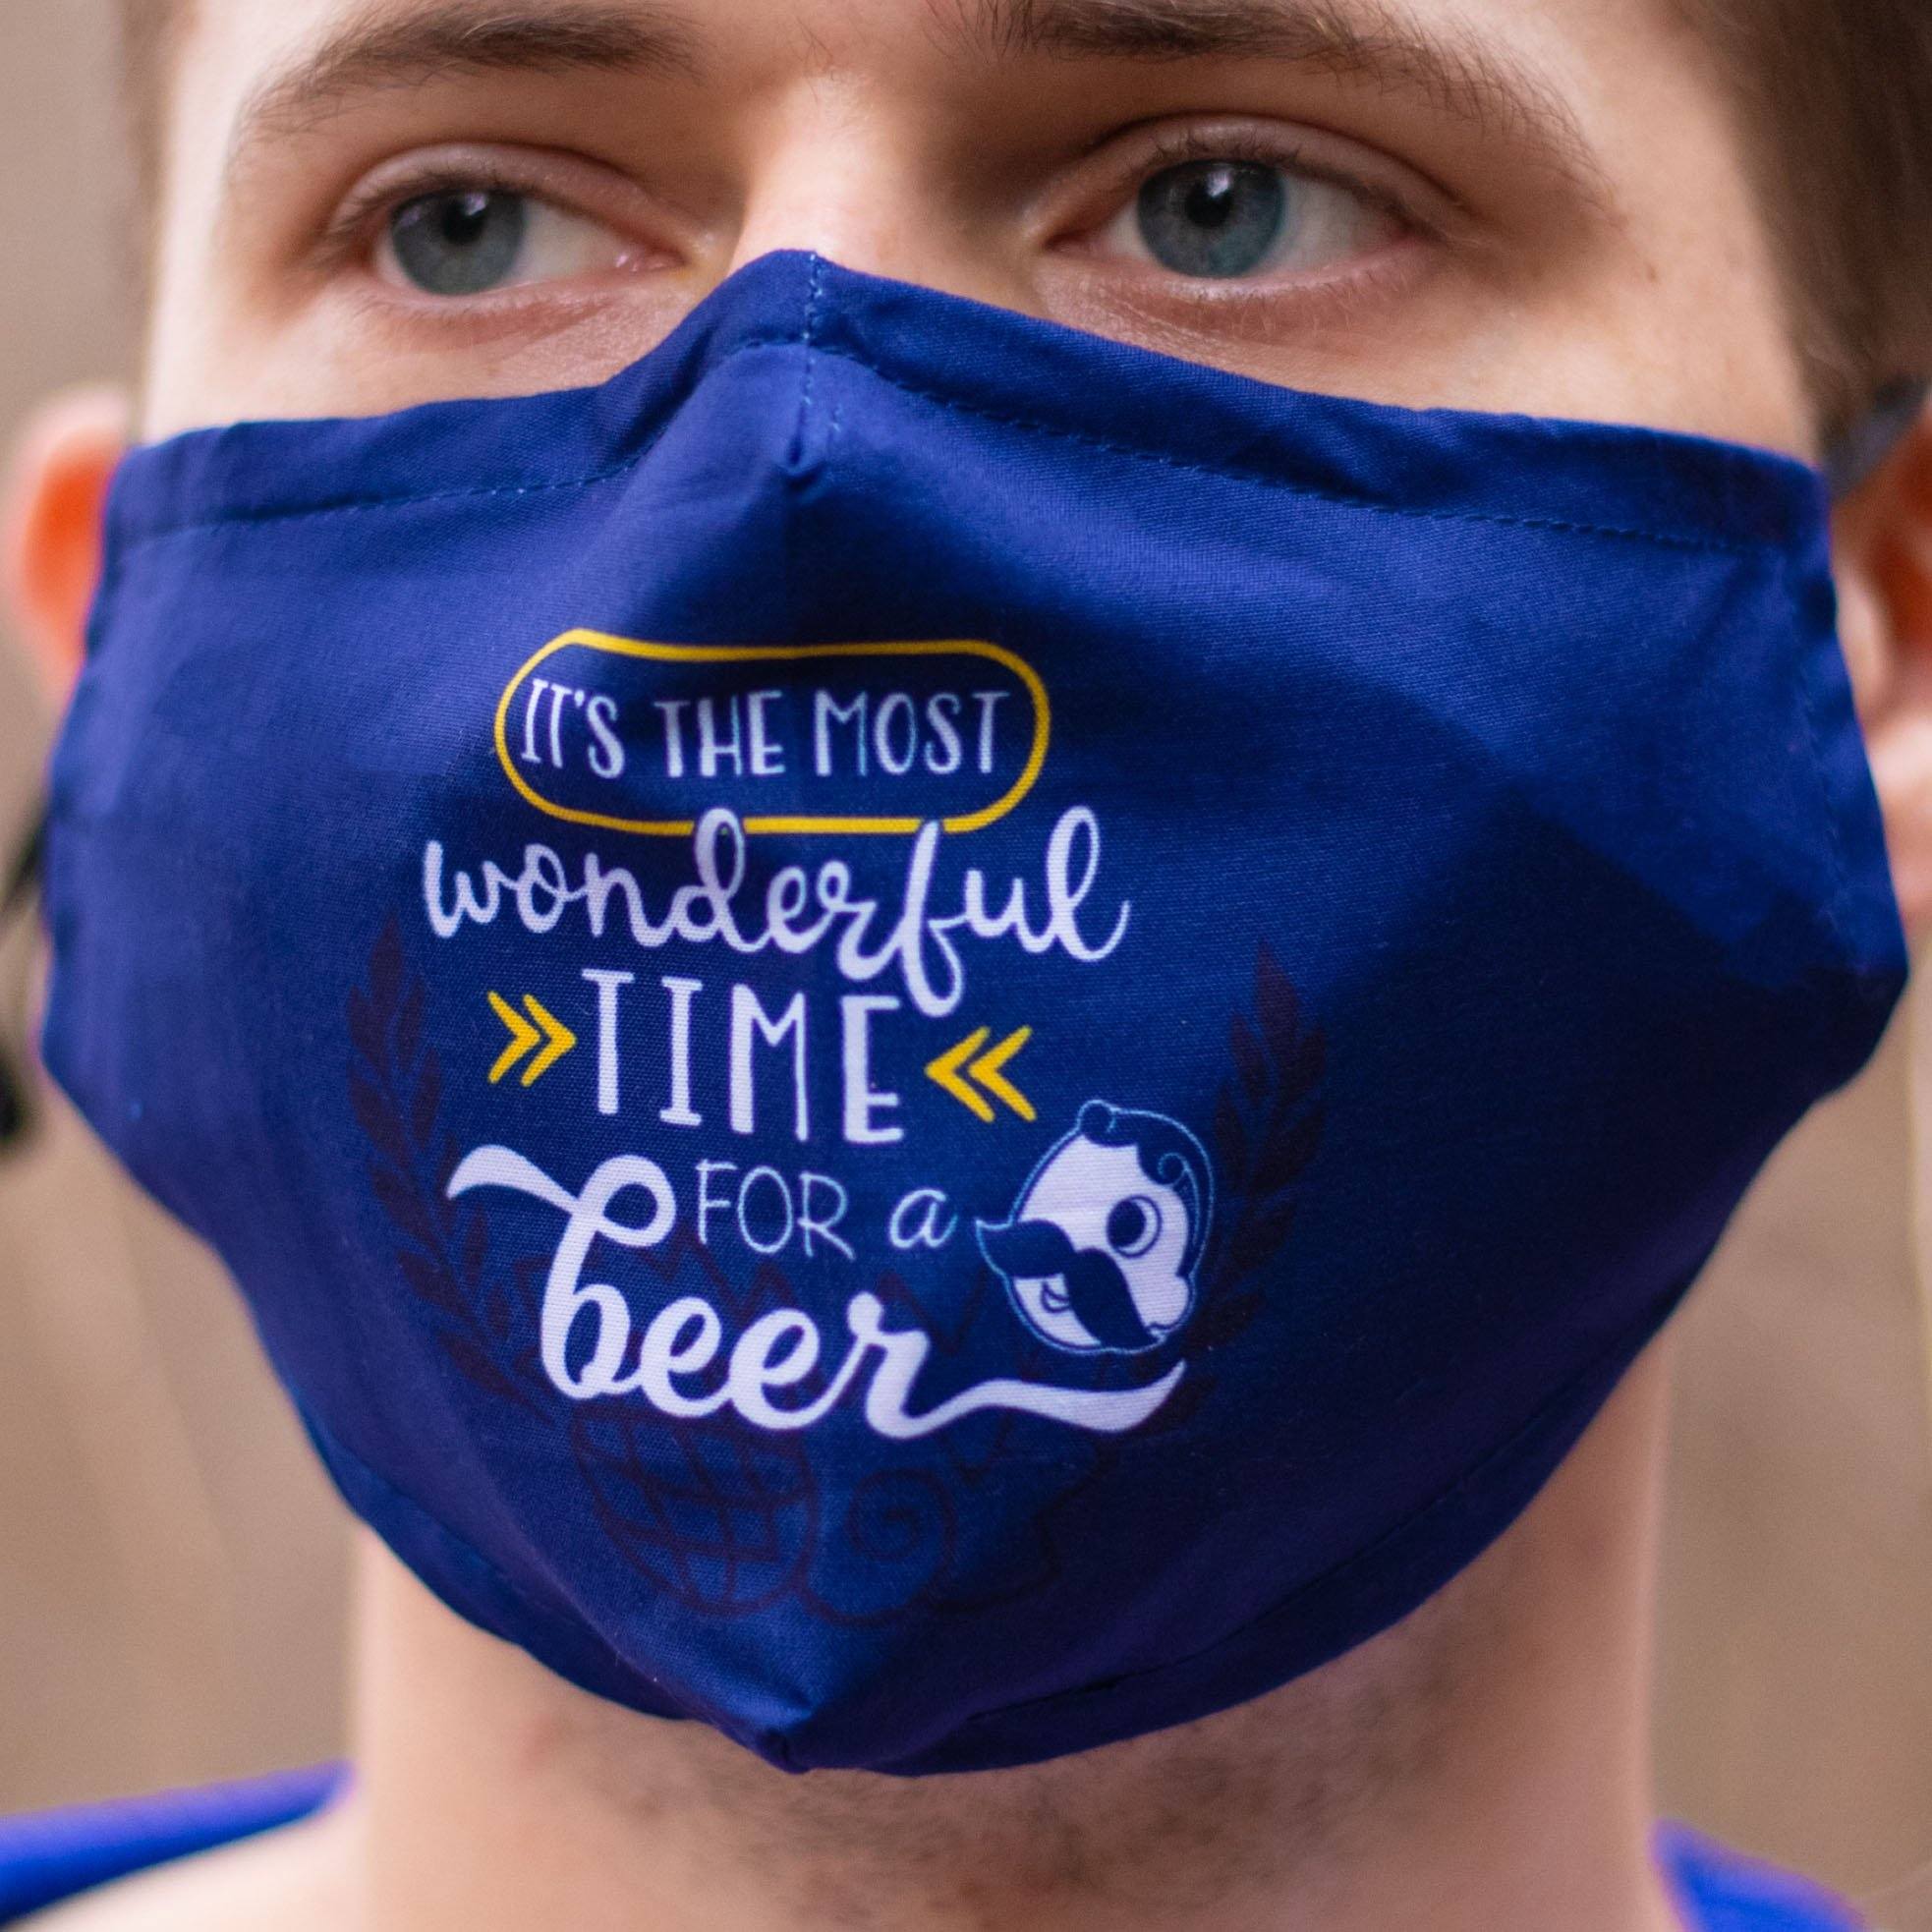 It's The Most Wonderful Time for a Beer (Navy) / Face Mask - Route One Apparel